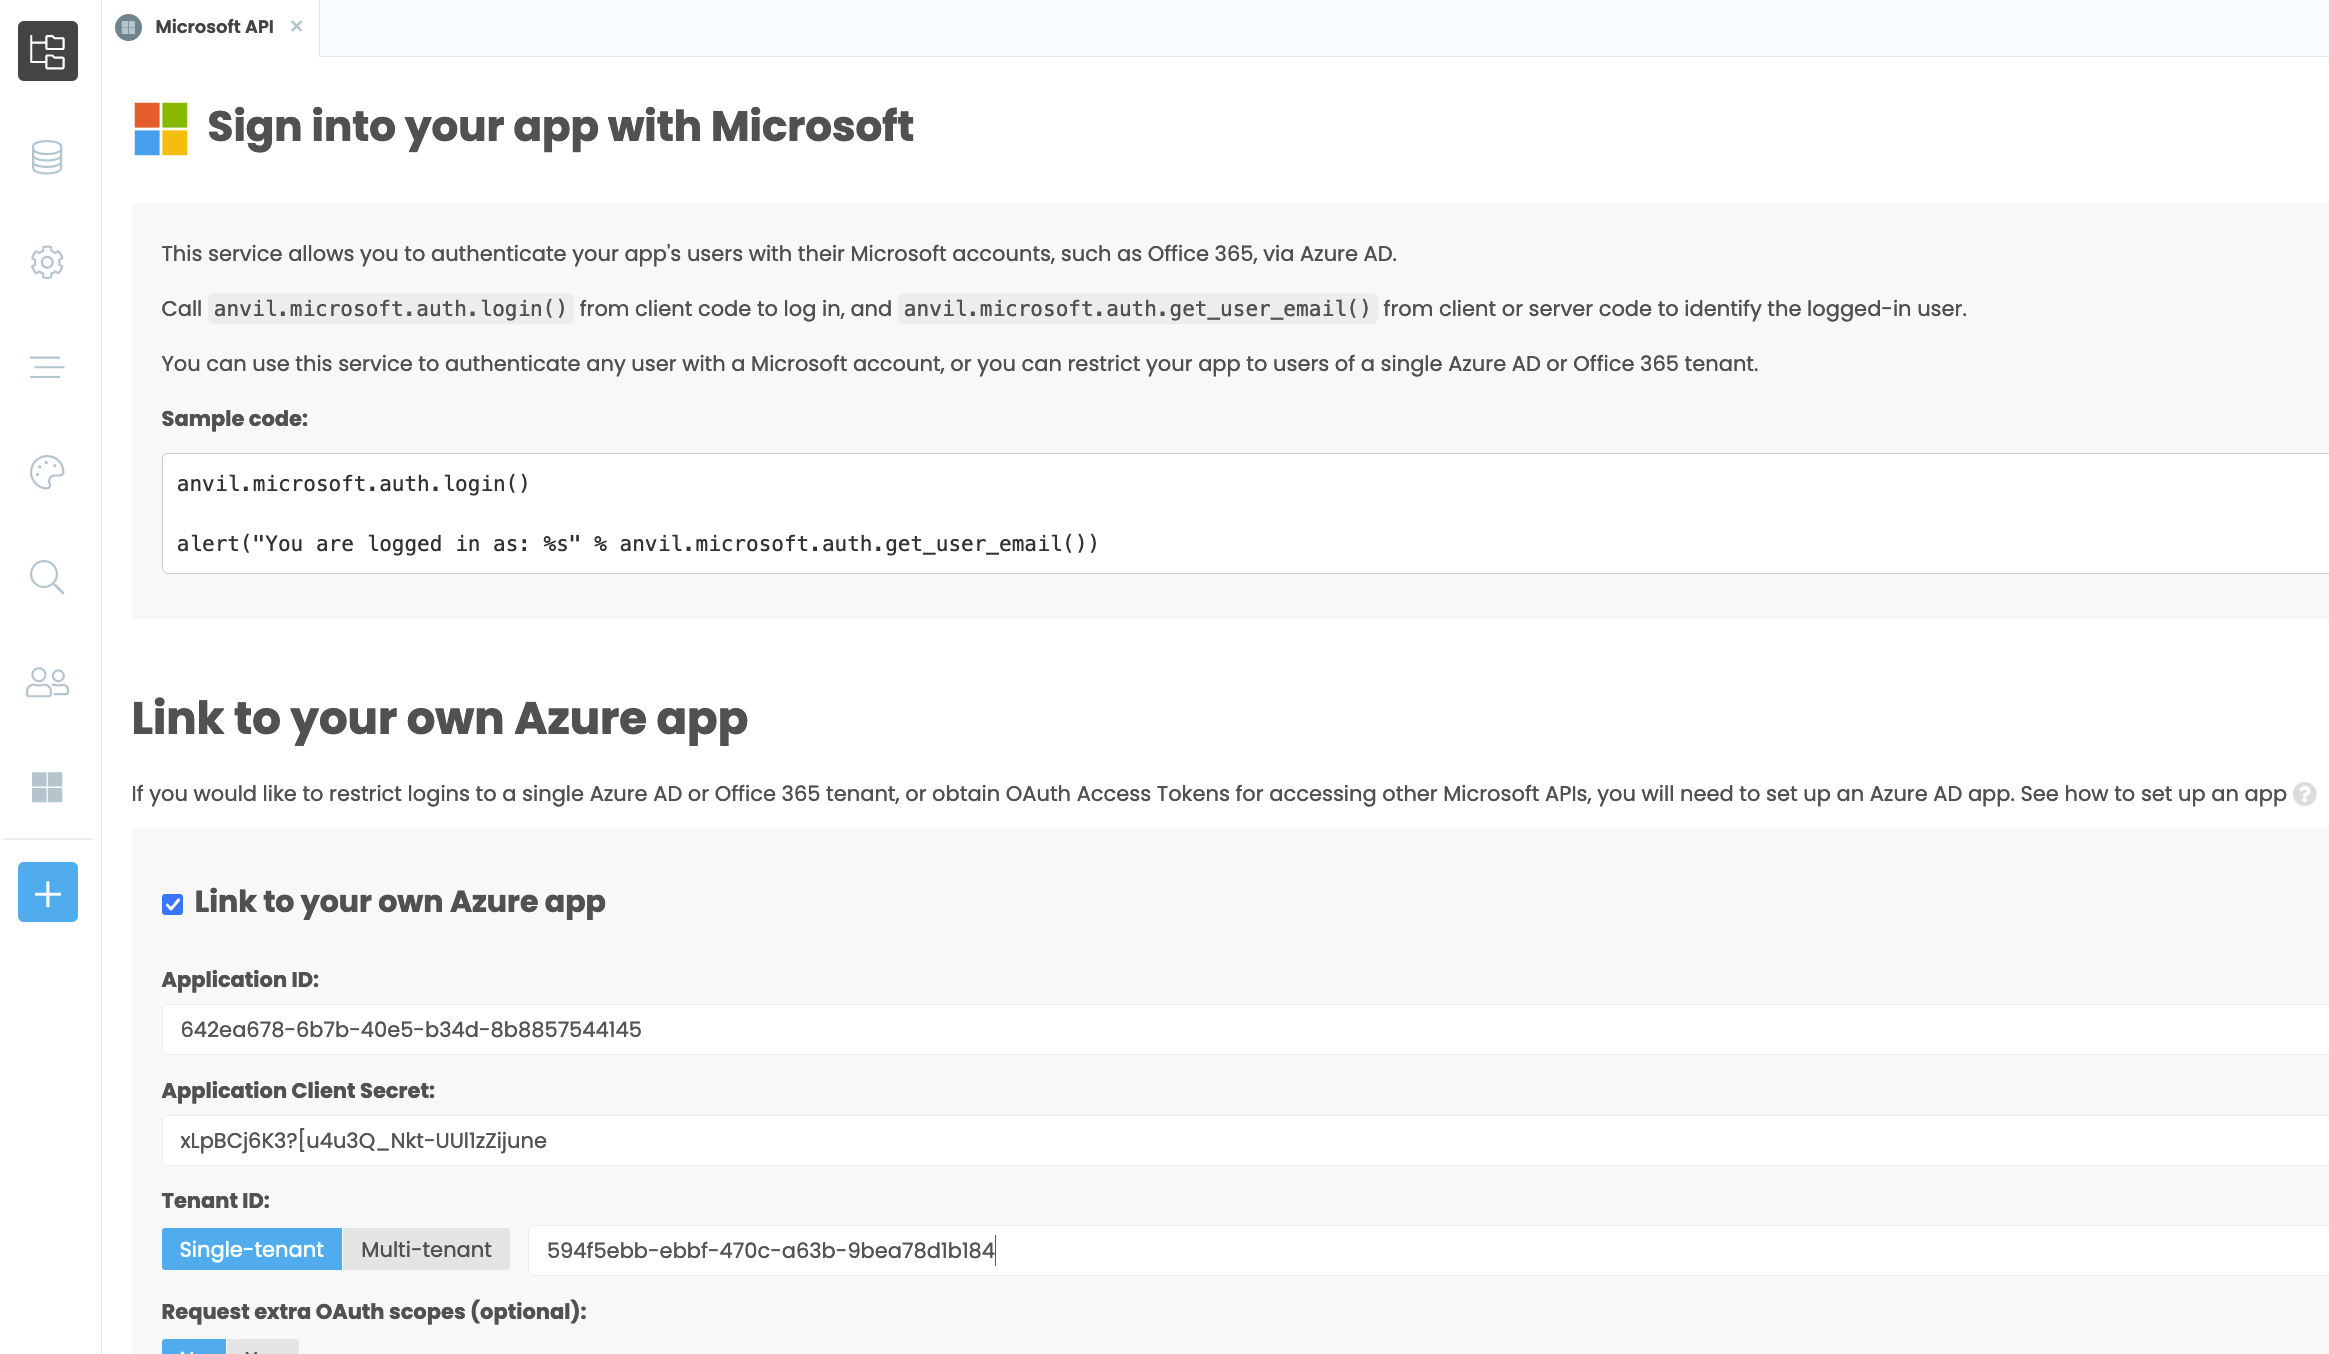 Anvil's Microsoft API Service config view. There is a 'link to your own Azure App' checkbox, which is checked. There are boxed for Application ID, Application Client Secret, and Tenant ID. These have the relevant keys copied in from Azure.